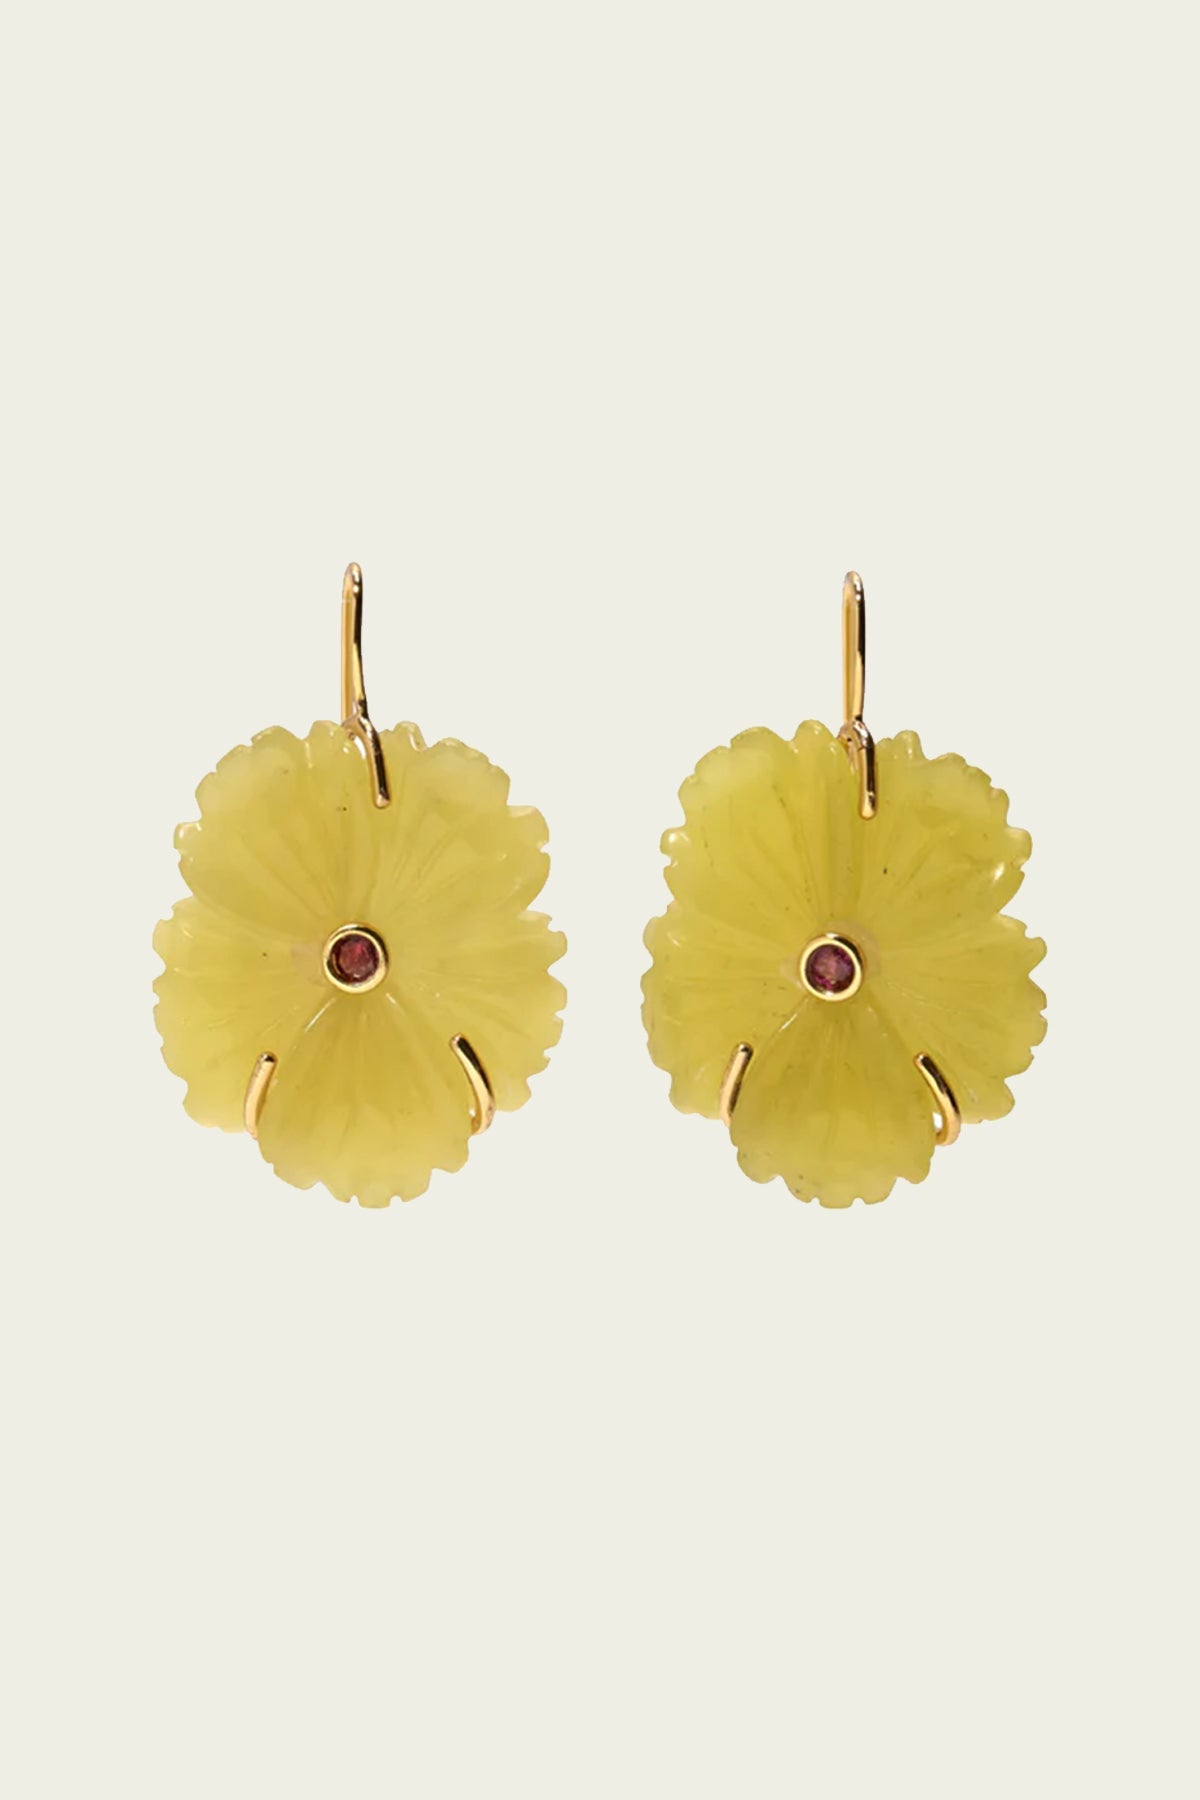 New Bloom Earrings in Canary - shop-olivia.com